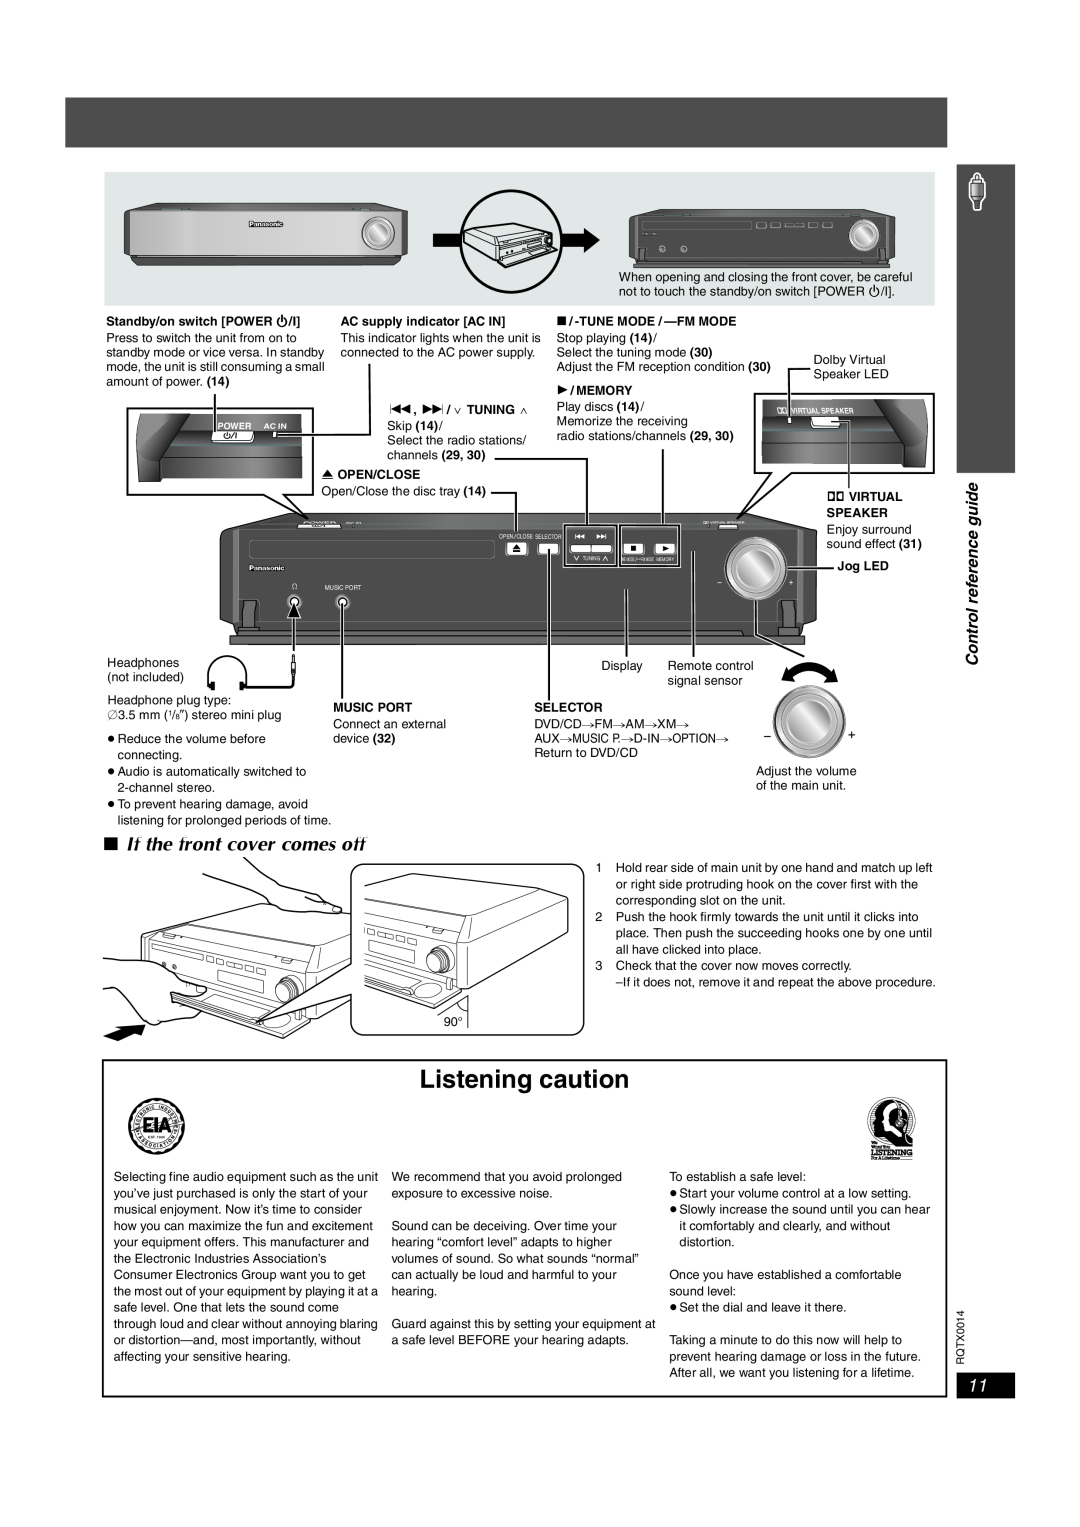 Panasonic SC-PTX5 manual Listening caution, If the front cover comes off, Control reference guide 